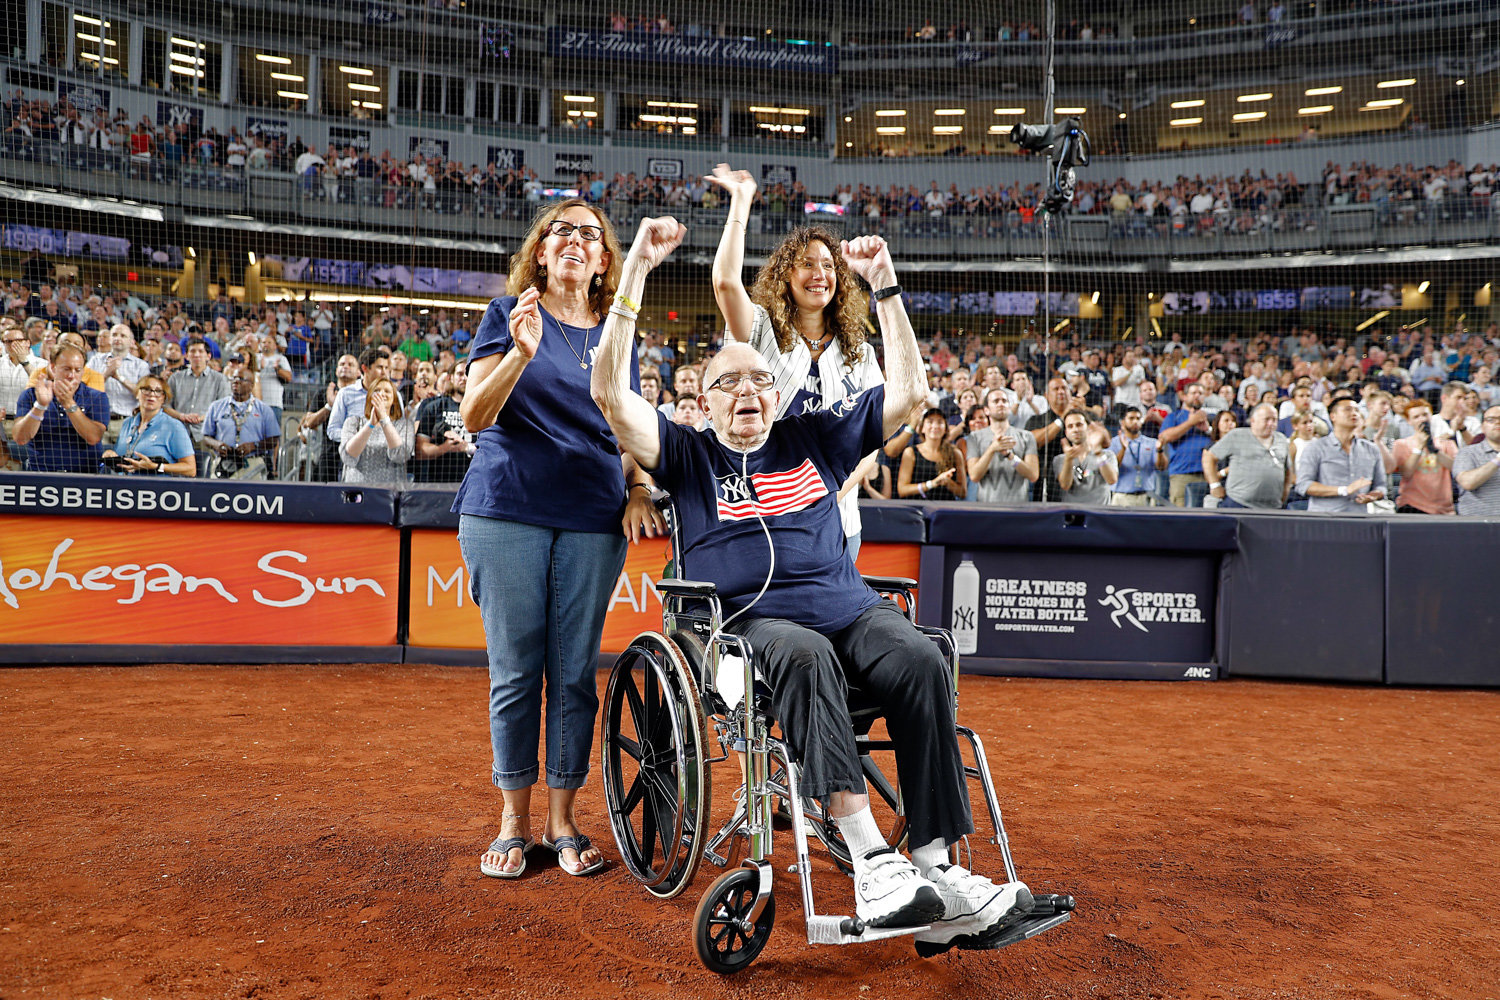 Alfred Schwartz cheers on the diamond at Yankee Stadium in 2018, joined by daughters Gayle and Heidi, right, who now grieve for him following his death on April 8 from complications related to COVID-19.